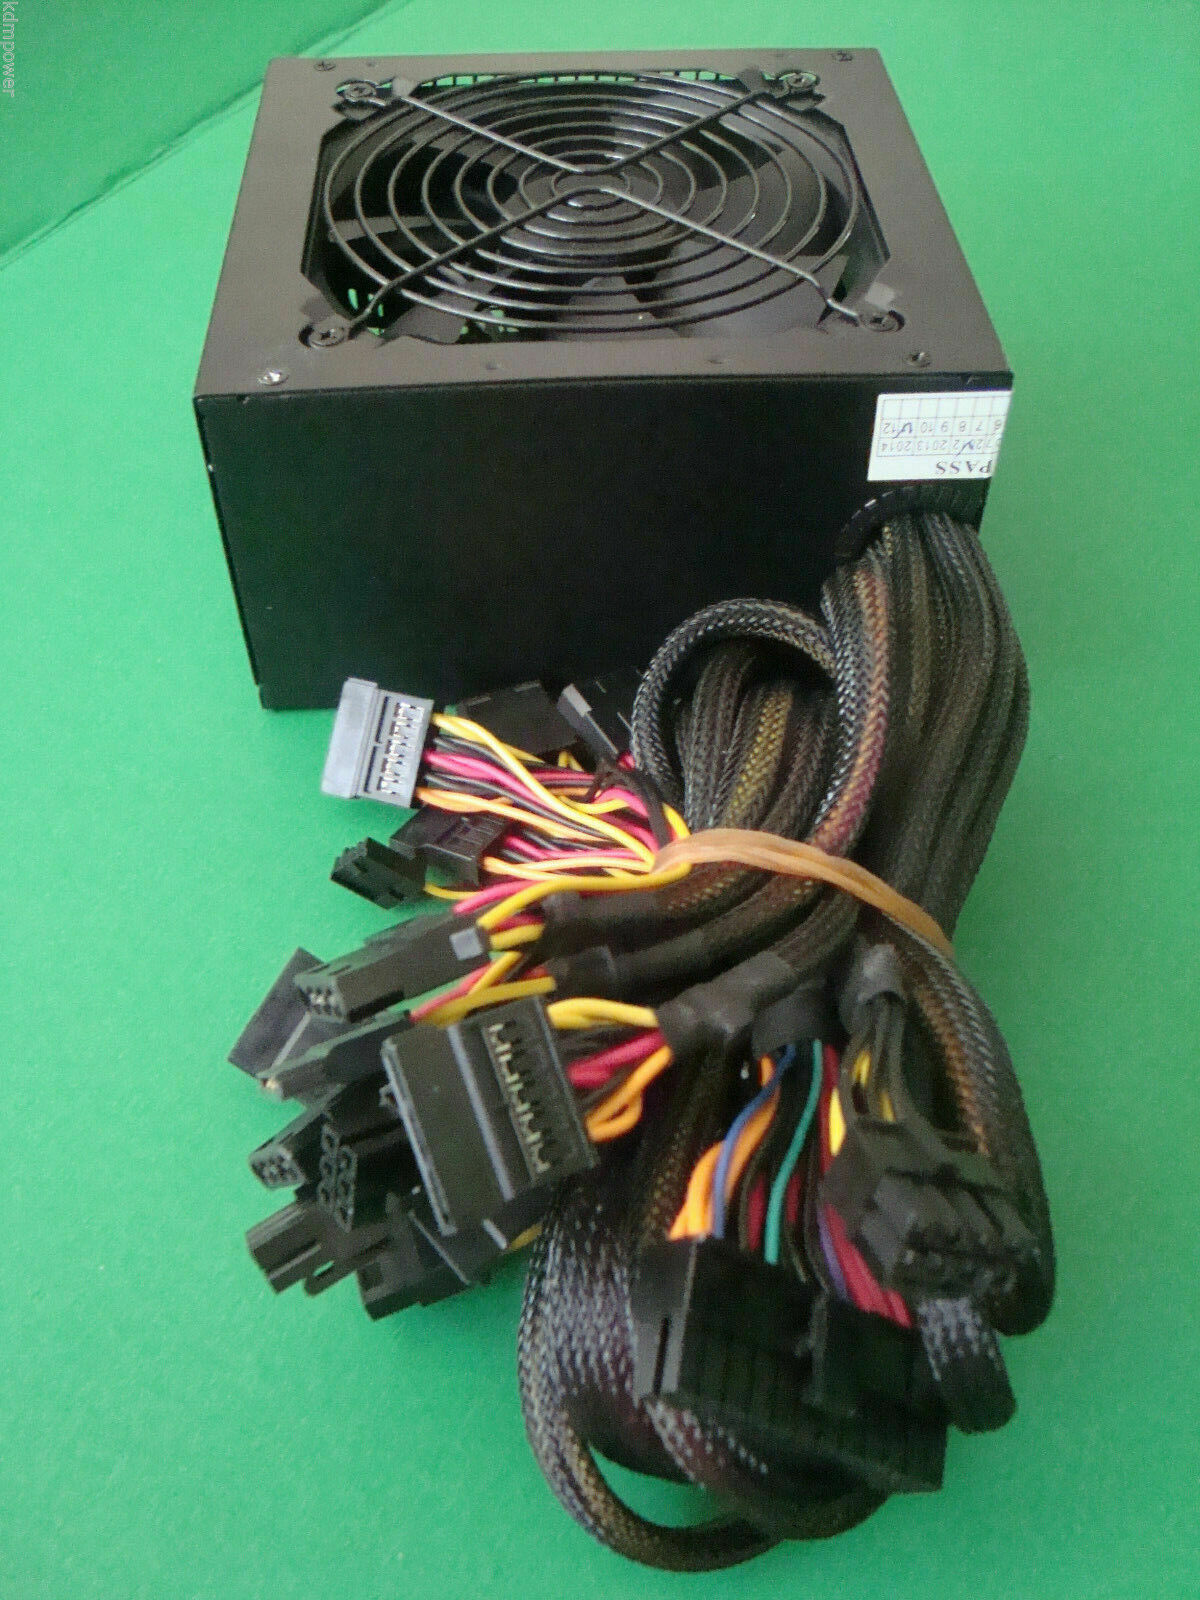 NEW 850W Dell XPS 8910 8920 8930 DPS-460DB-15 A D460AM-03 Replac Power Supply 2P